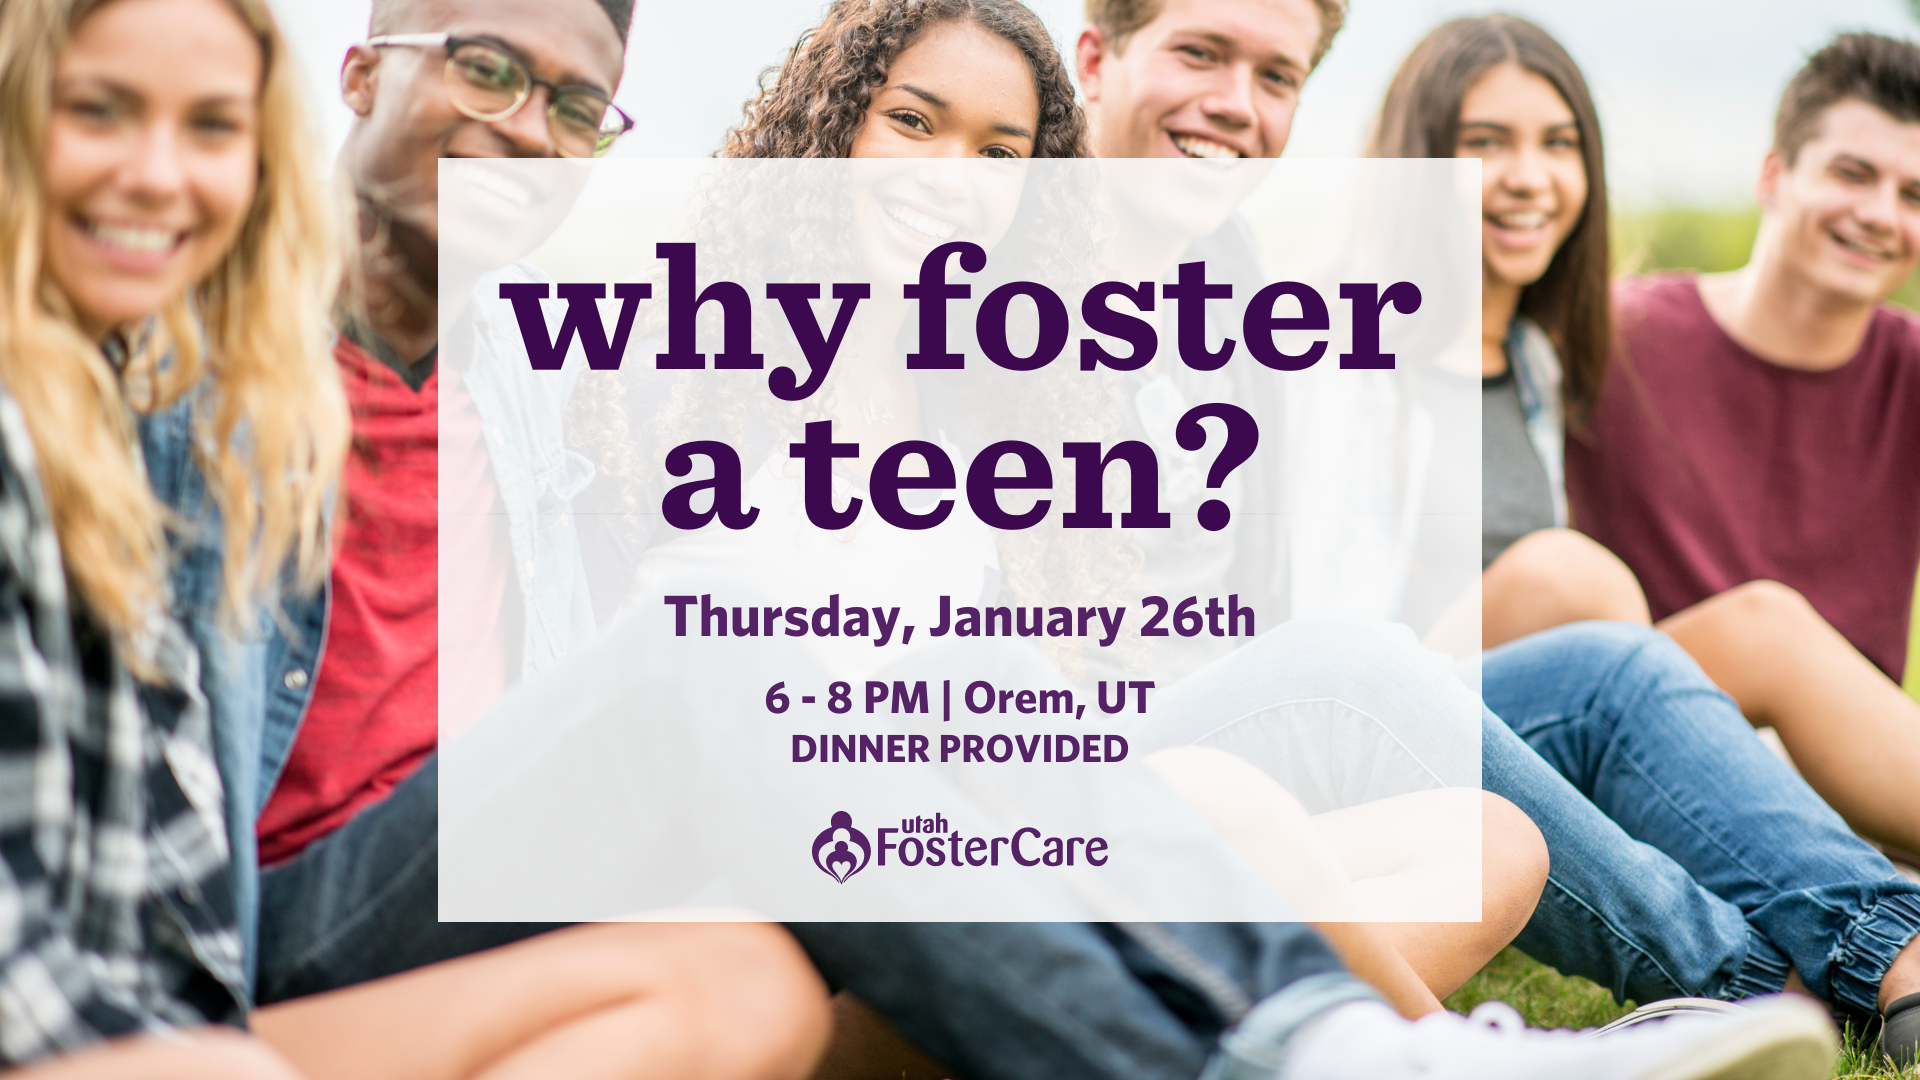 Why Foster a Teen? - A Utah Foster Care Event - January 26th in Orem UT